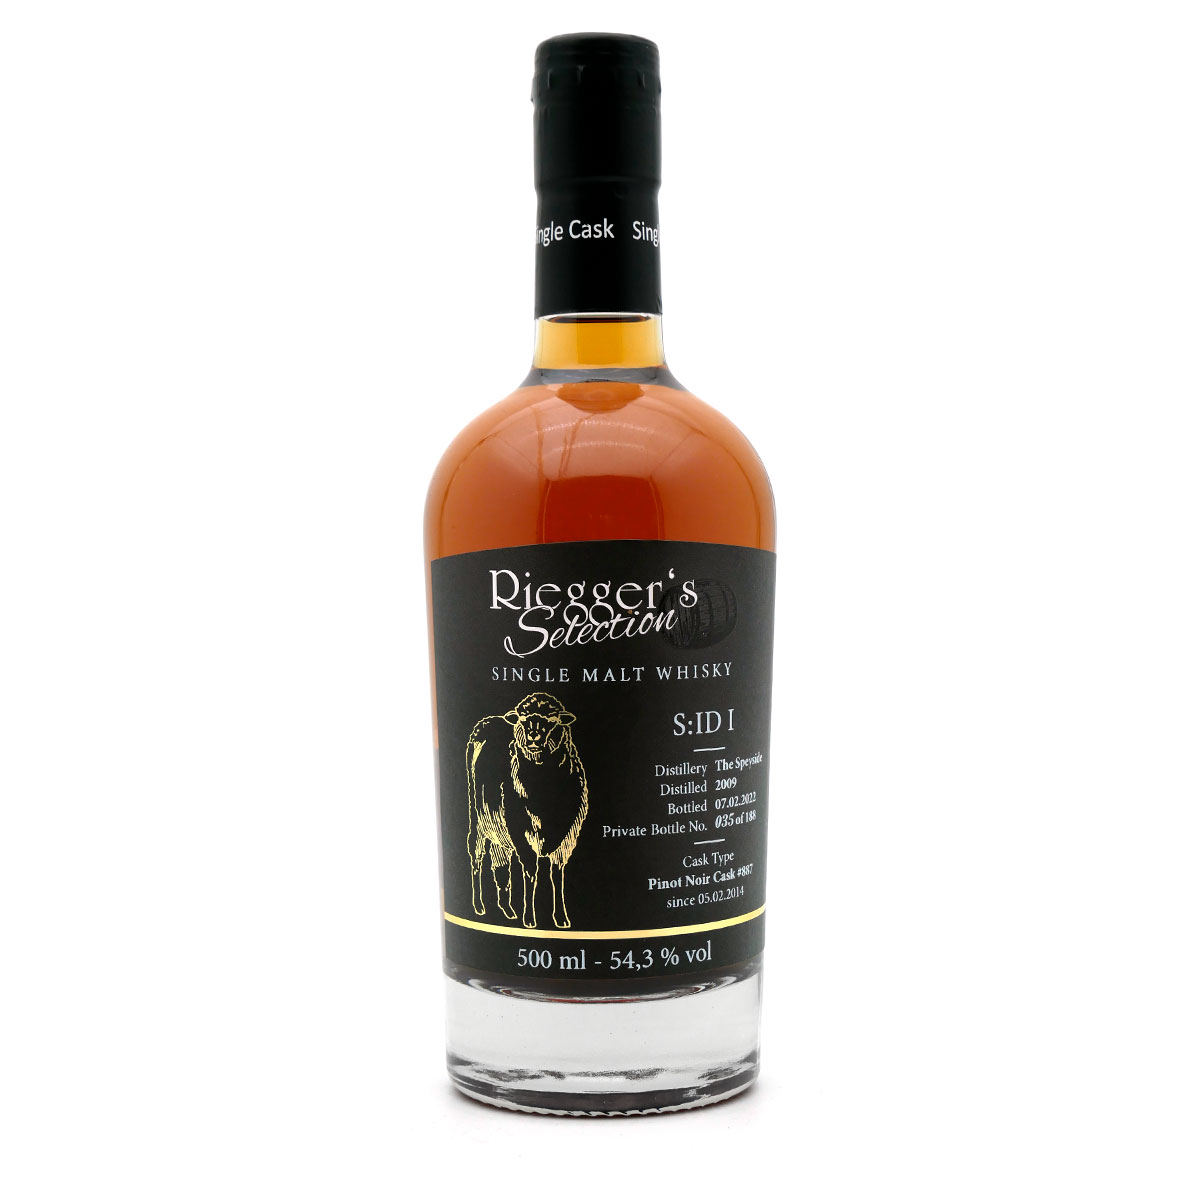 S:ID 1 - The Speyside 2009 Pinot Noir Cask - Riegger's Selection (54,3 % vol)